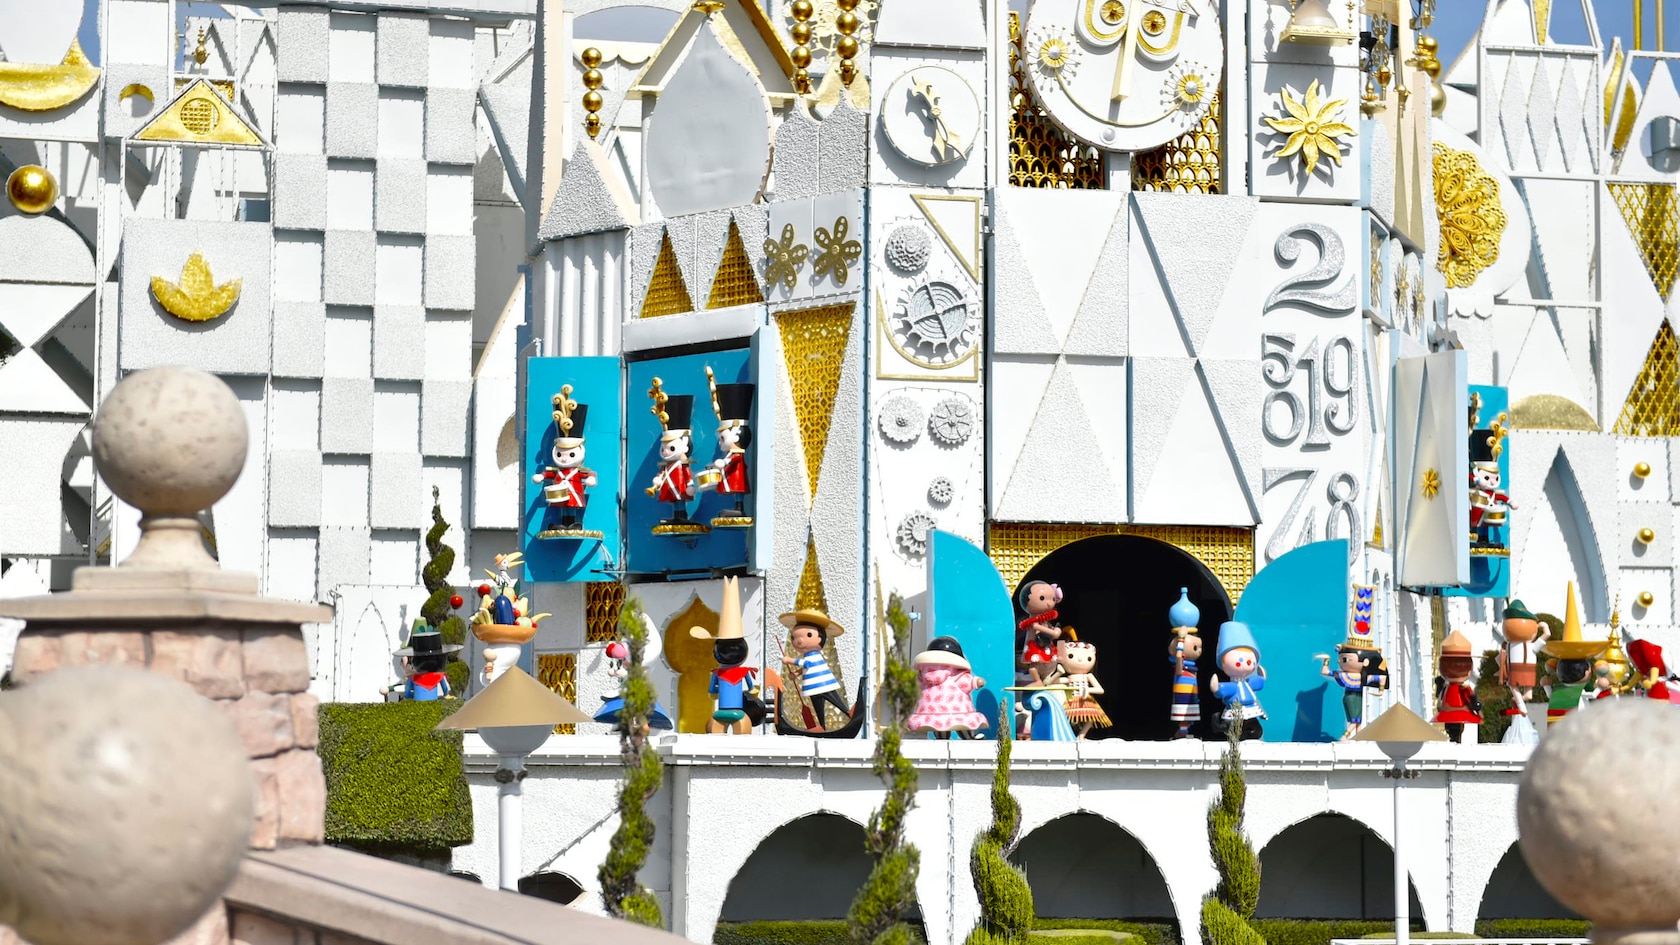 The fanciful it’s a small world facade is full of whimsical detail